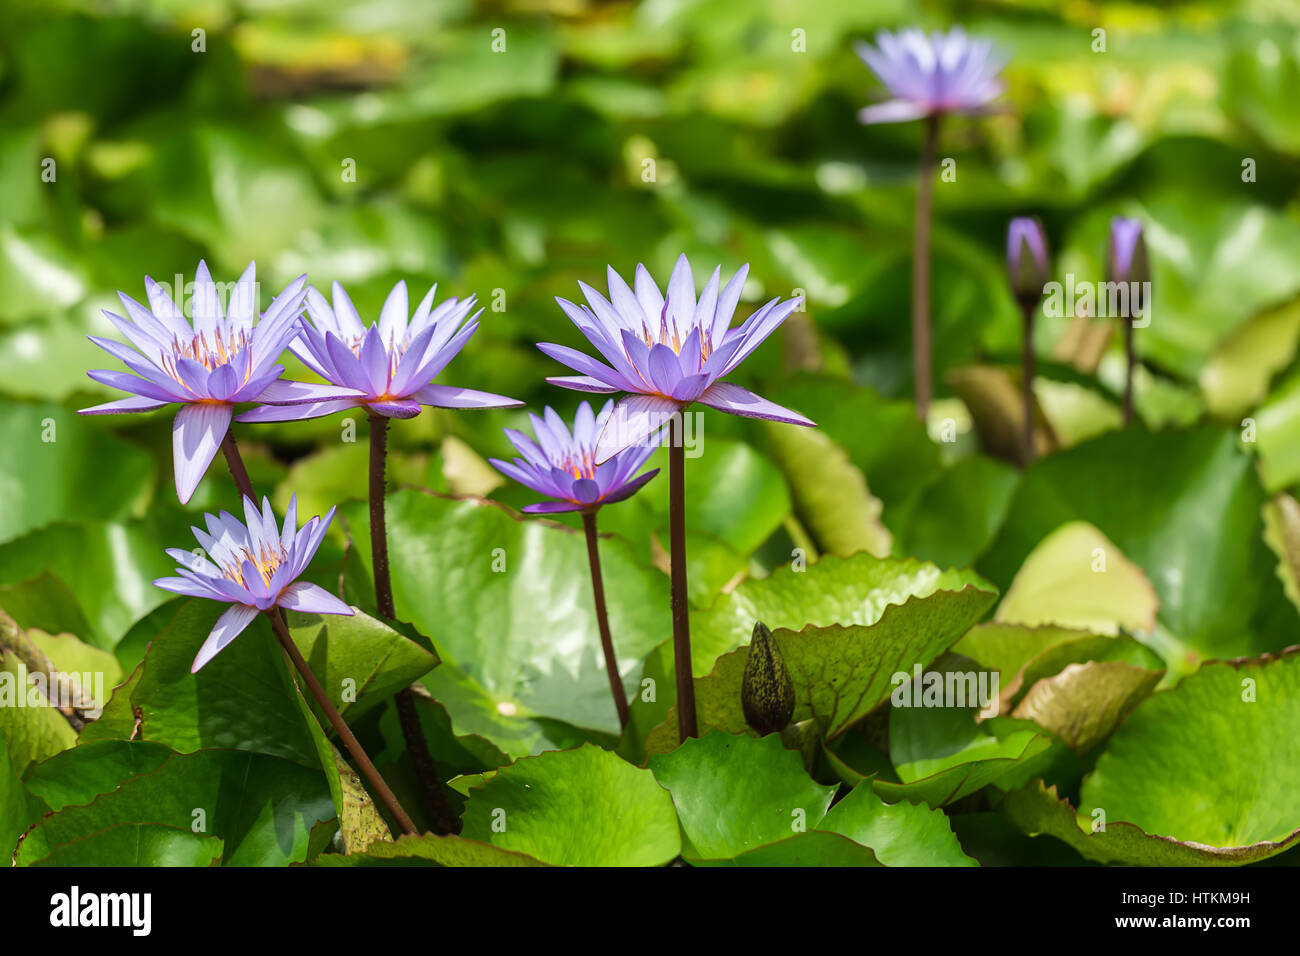 Several flowering violet flowers of the water lily on the green leaves background in the Cloud Forest in Singapore. Closeup photo. Horizontal. Stock Photo